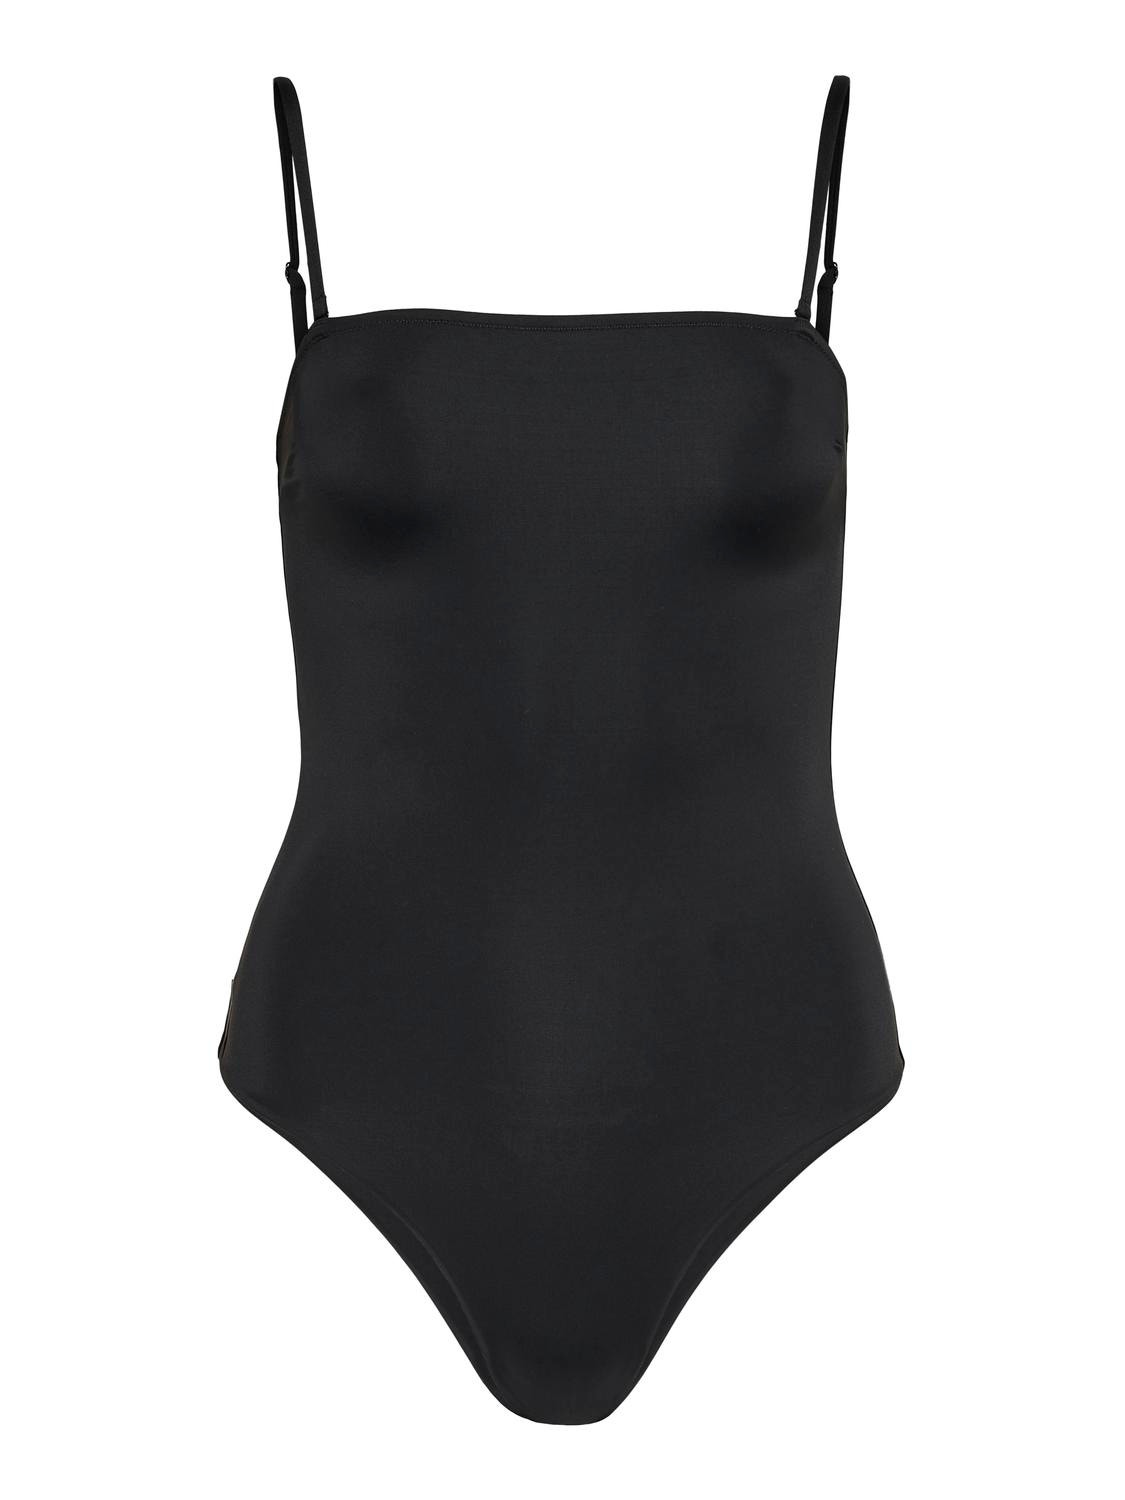 ONLY Swimsuit with adjustable straps -Black - 15250852